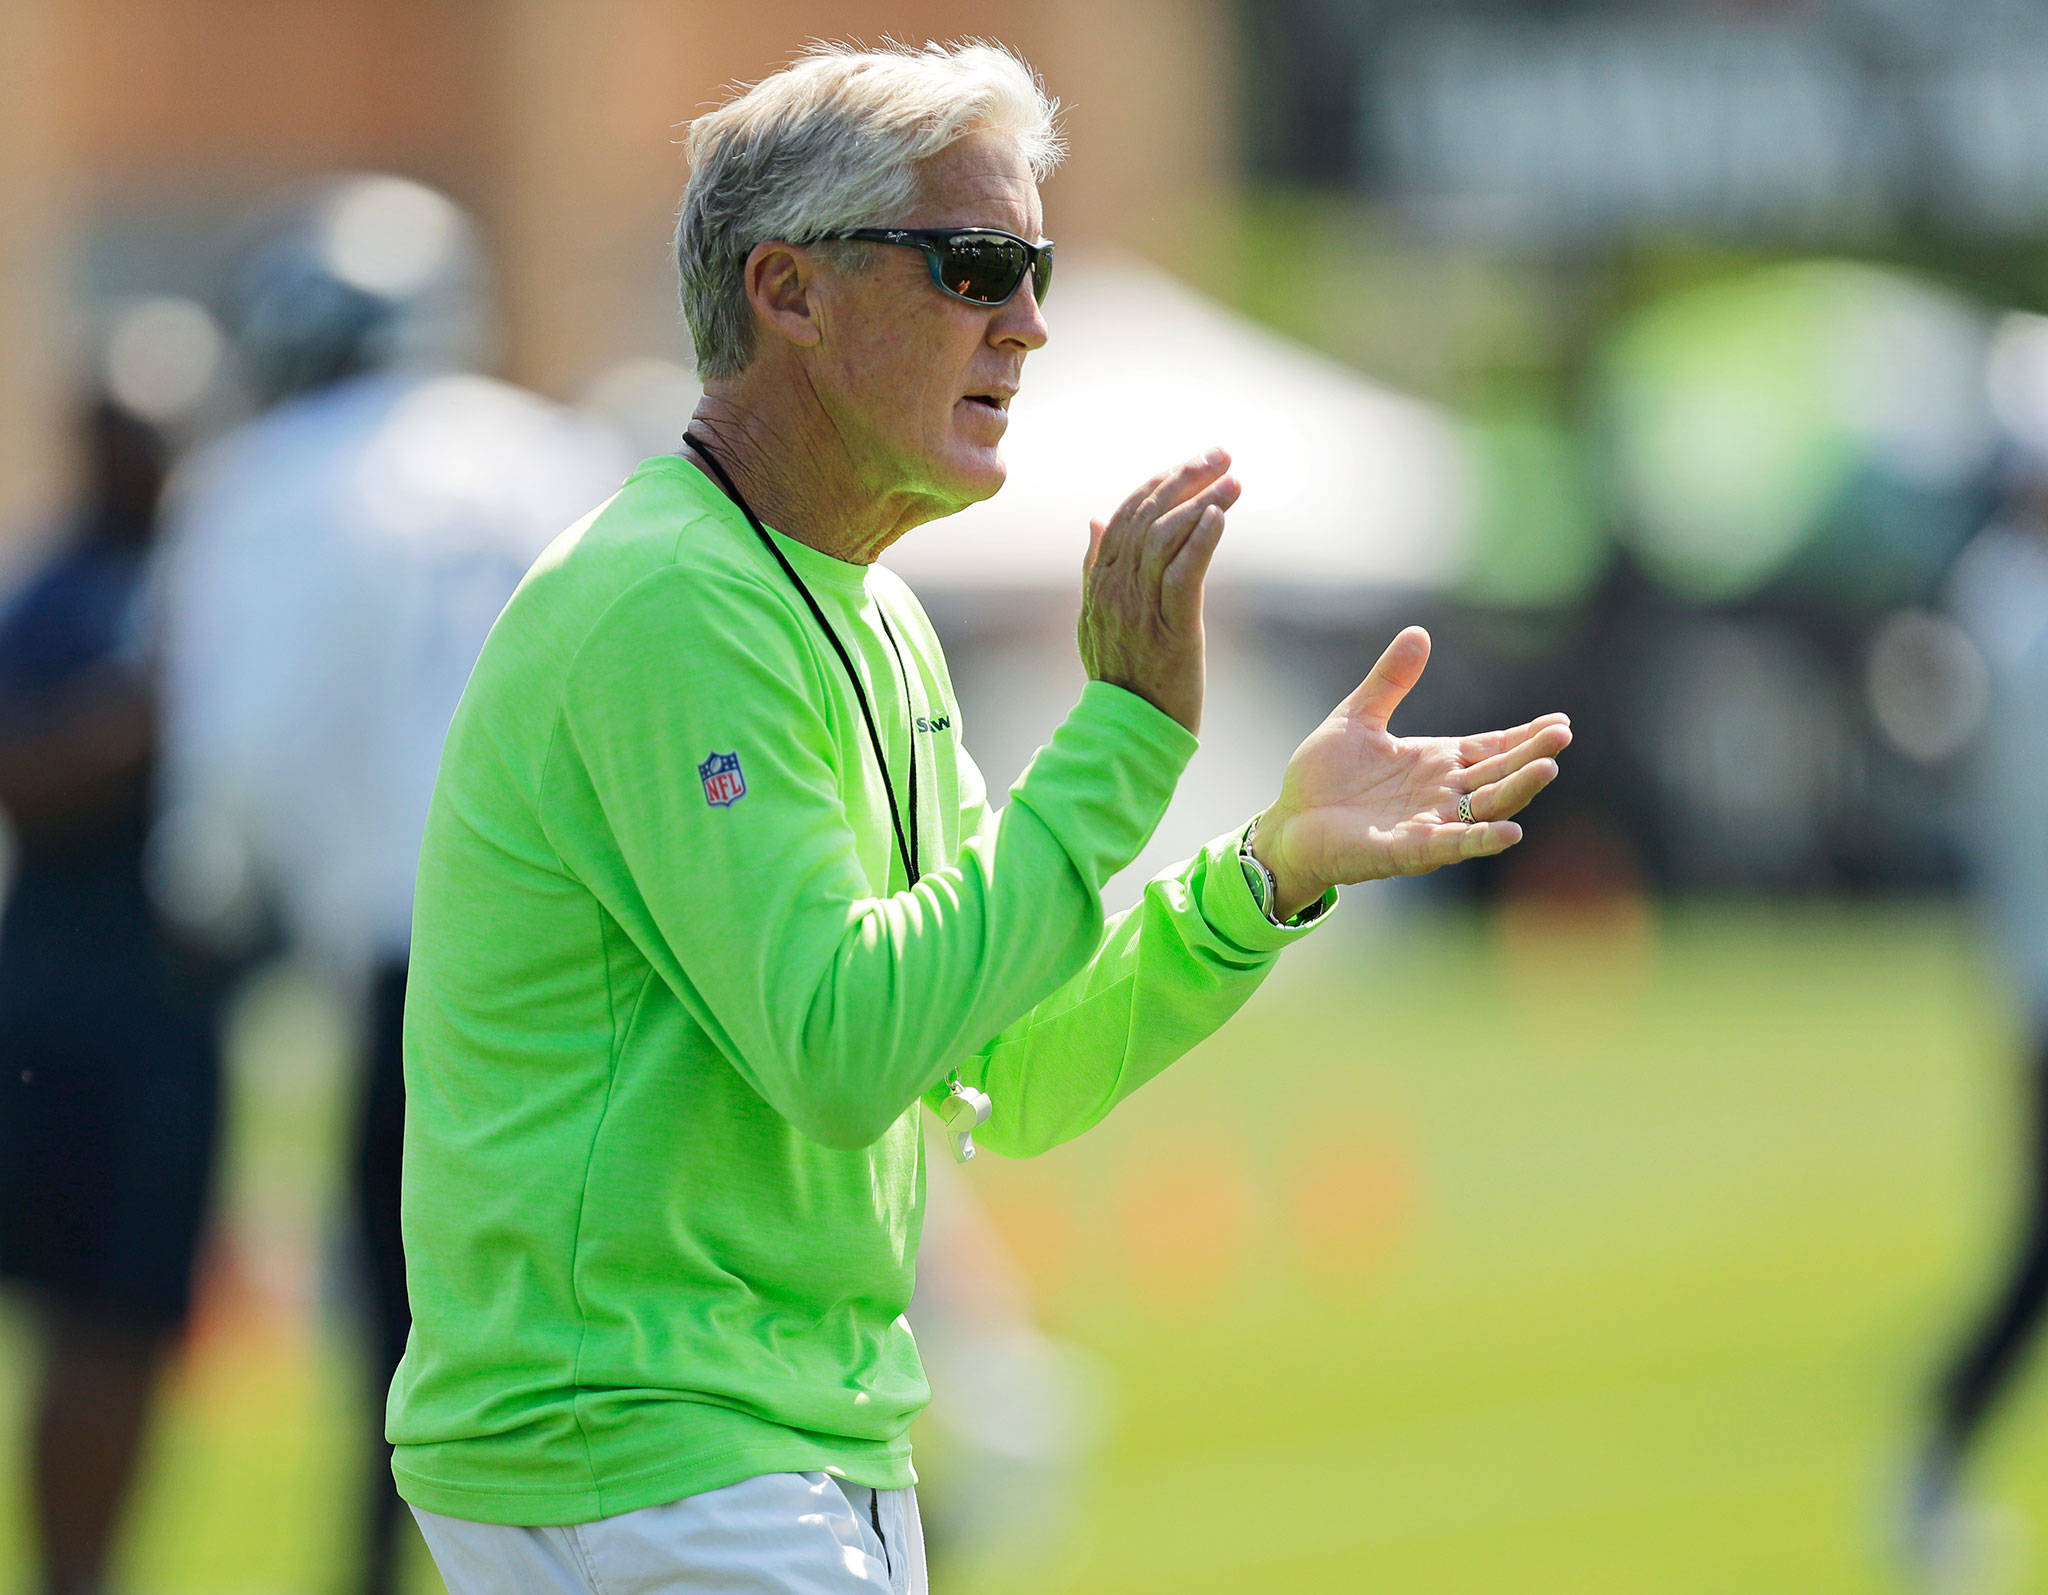 Head coach Pete Carroll and the rest of the Seattle Seahawks hit the field for their first team practice of training camp Wednesday in Renton. (AP Photo/Ted S. Warren)